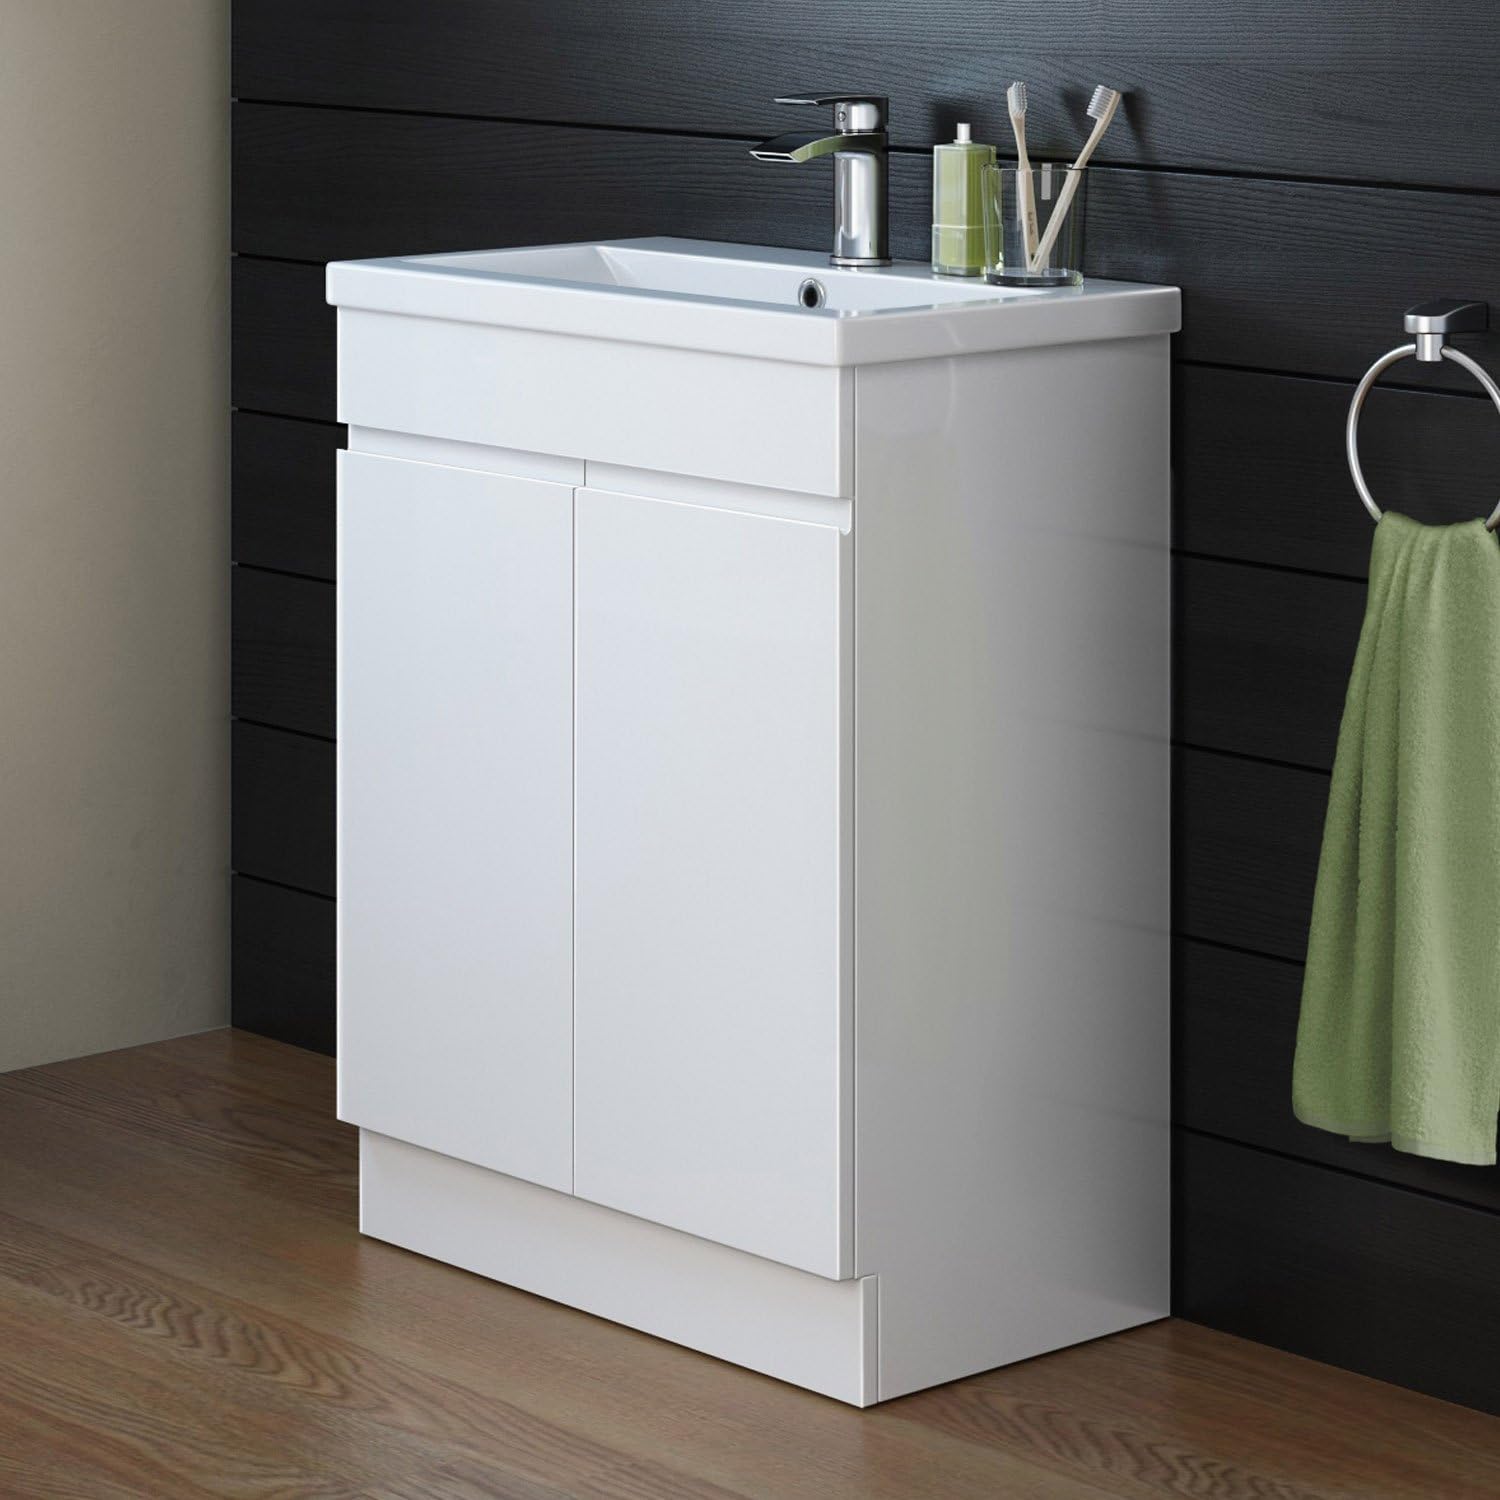 Trent Square Vanity Unit With Mid-Edged Basin - 600mm x 400mm - Gloss White (Flat Pack)